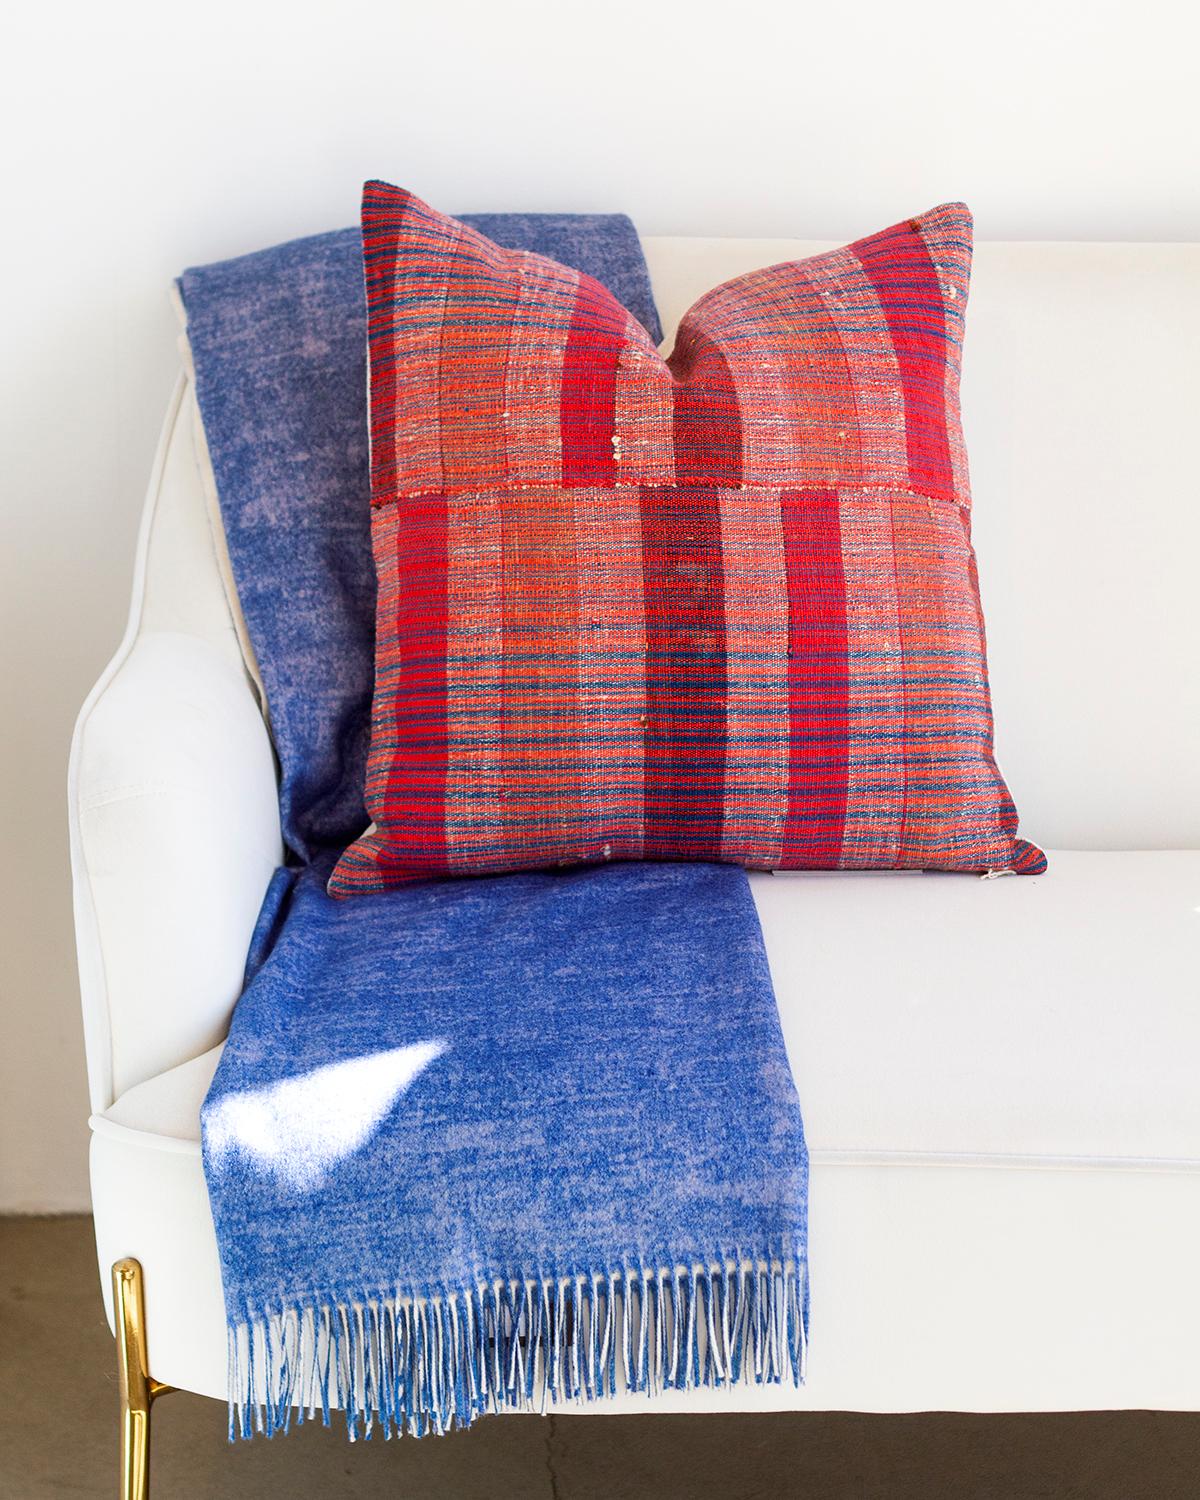 One of a kind vintage linen throw pillows to beautify your home
A hundred years ago these fabrics used to be cereal sacks in Northern Portugal. Now they get rediscovered and transformed into a rare collectible.  This cosmopolitan Red Striped Matilde